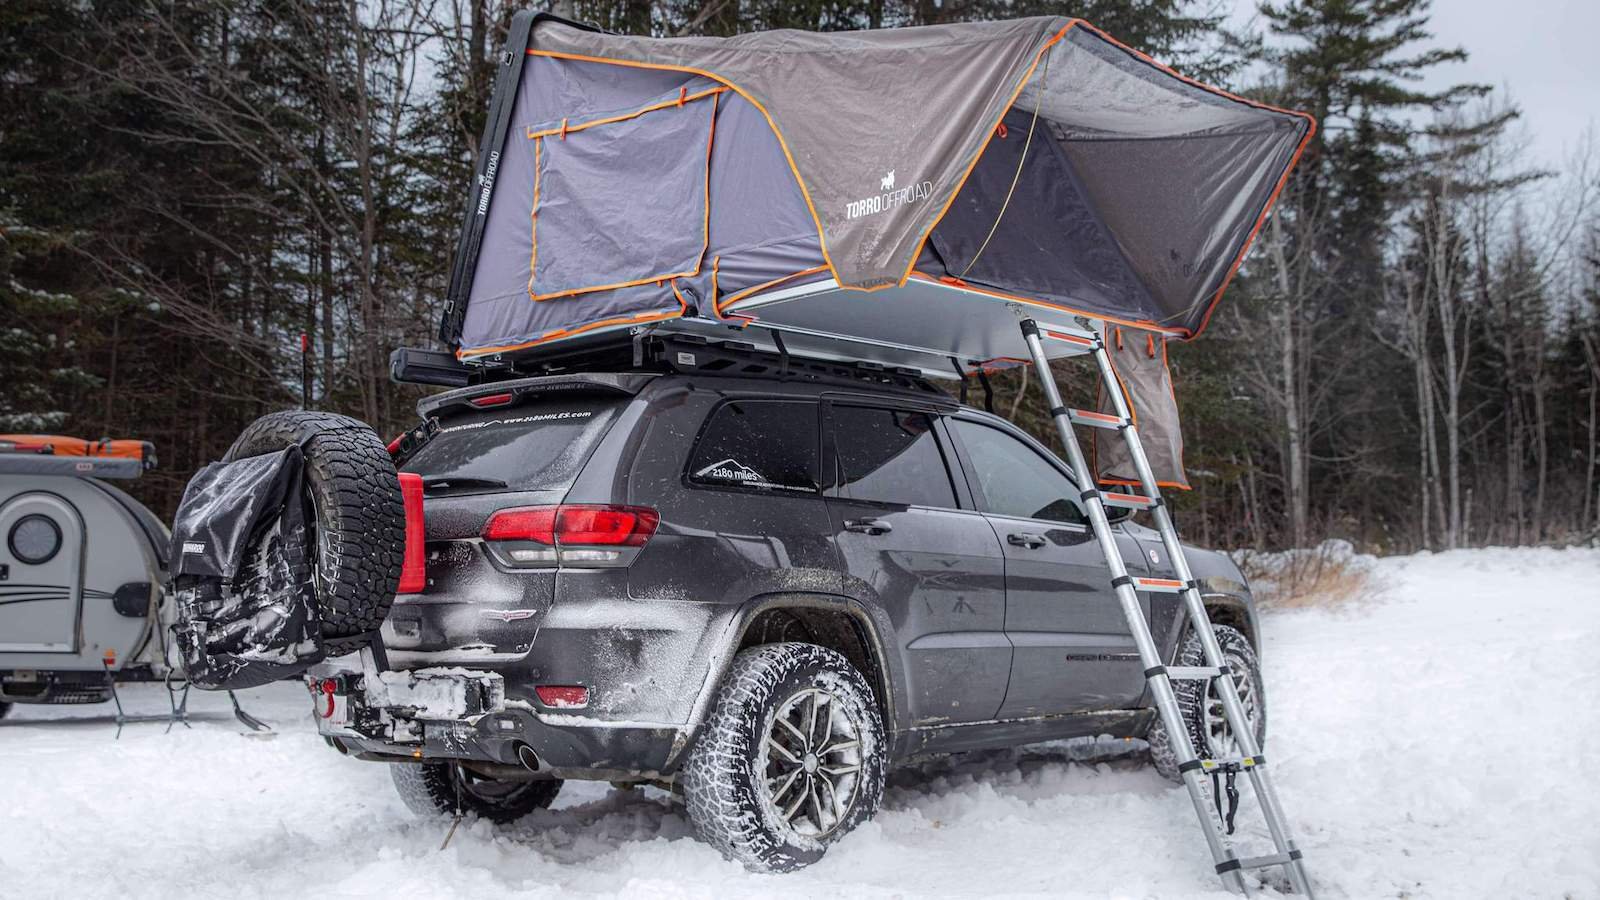 SkyLux Hard-Shell Rooftop Tent can sleep four people and sets up in about a minute